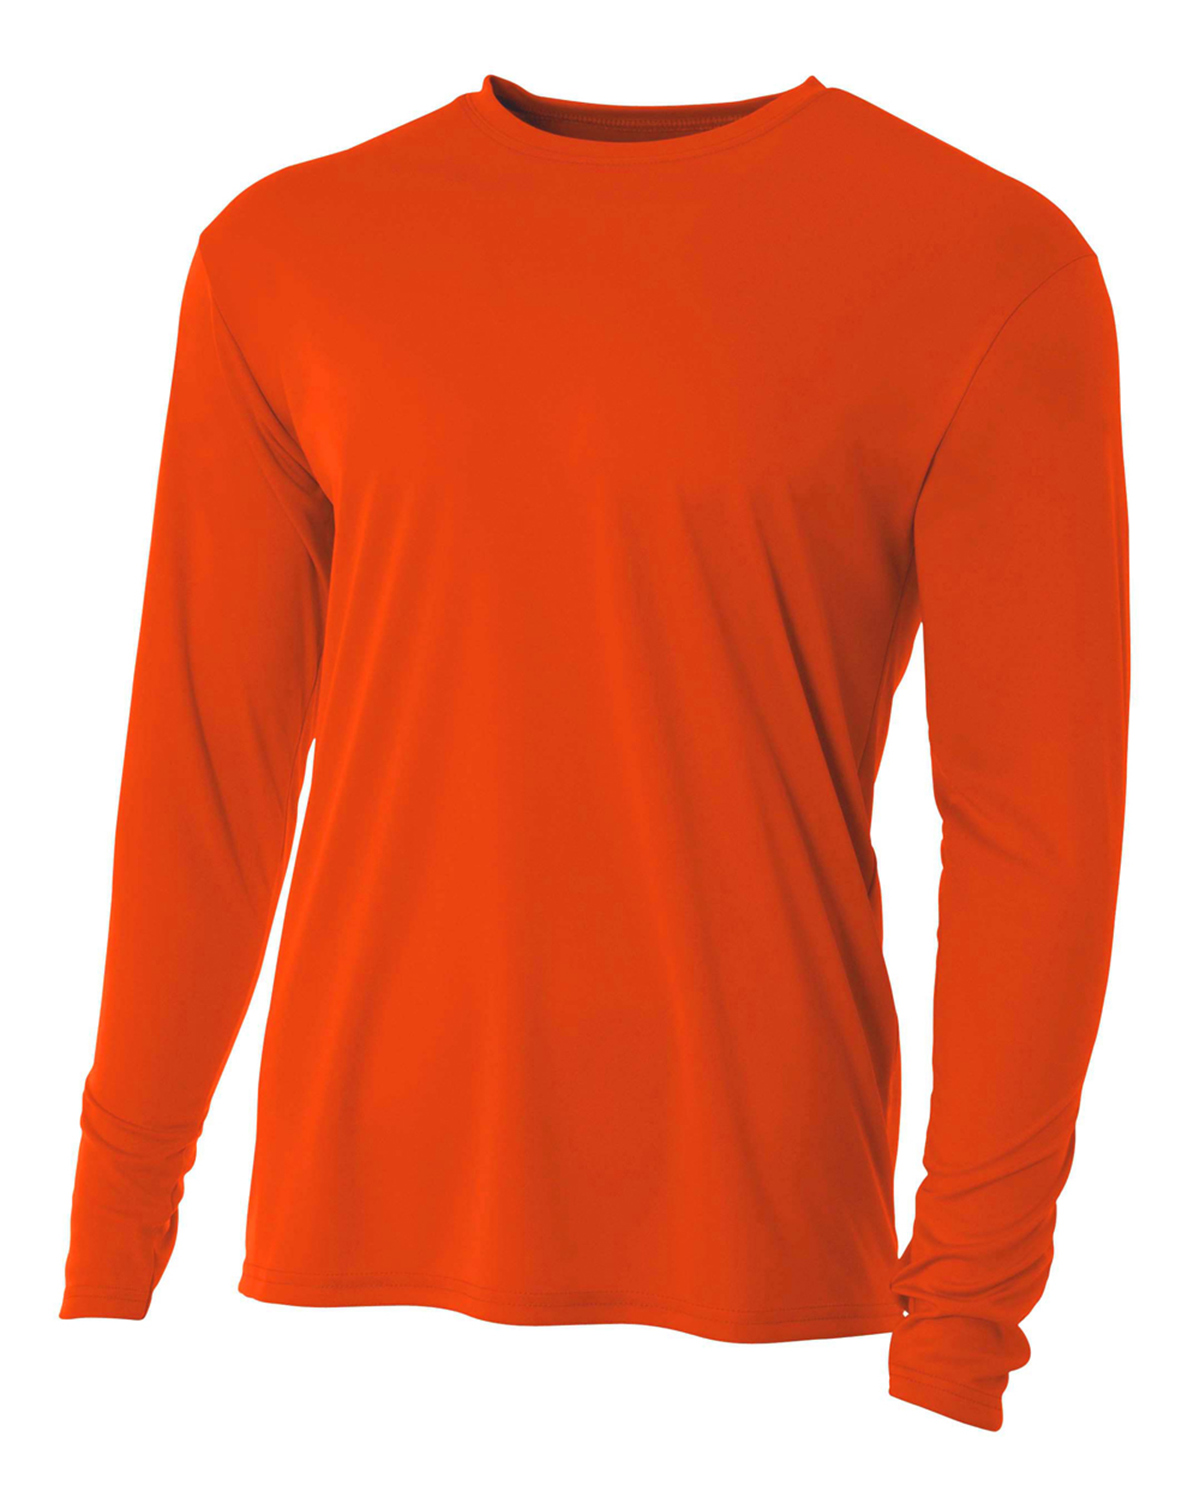 A4 N3165 - Adult Cooling Performance Long-Sleeve Tee